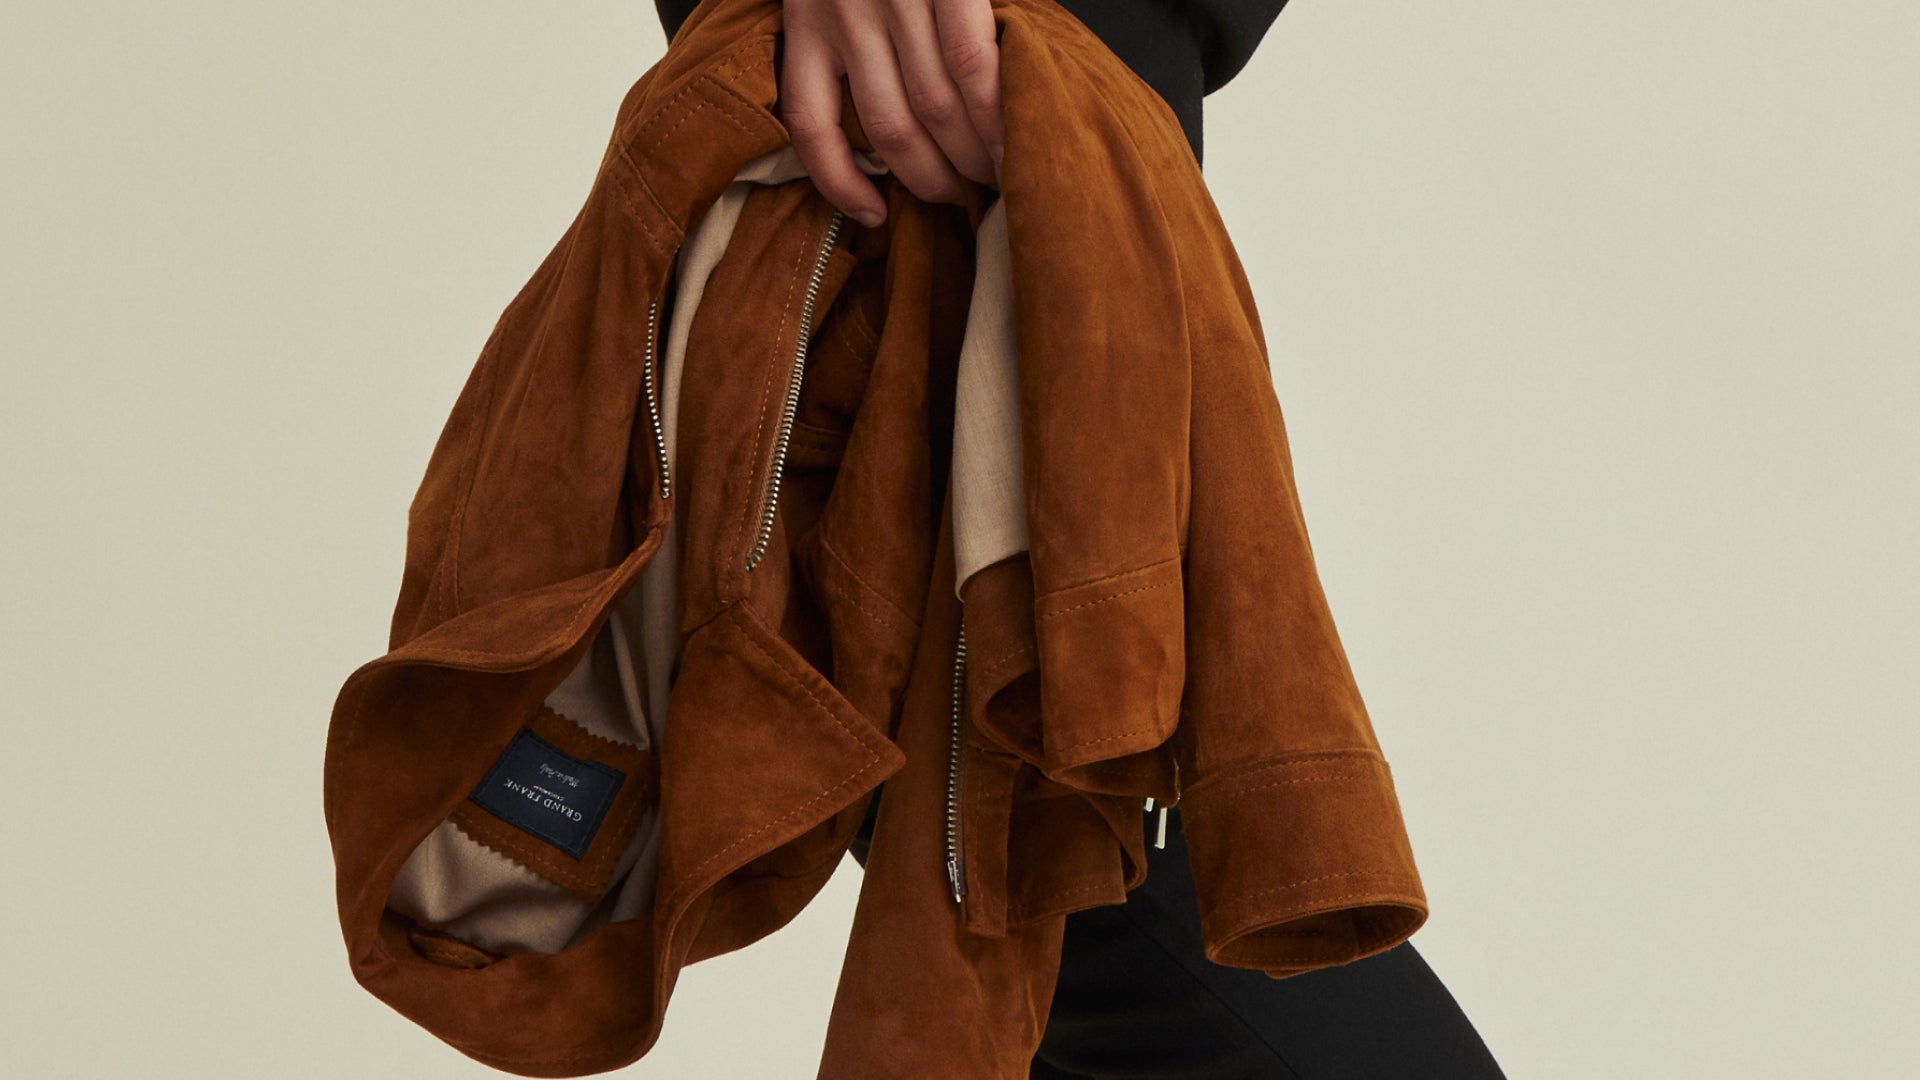 Everything you need to know about caring for suede, according to